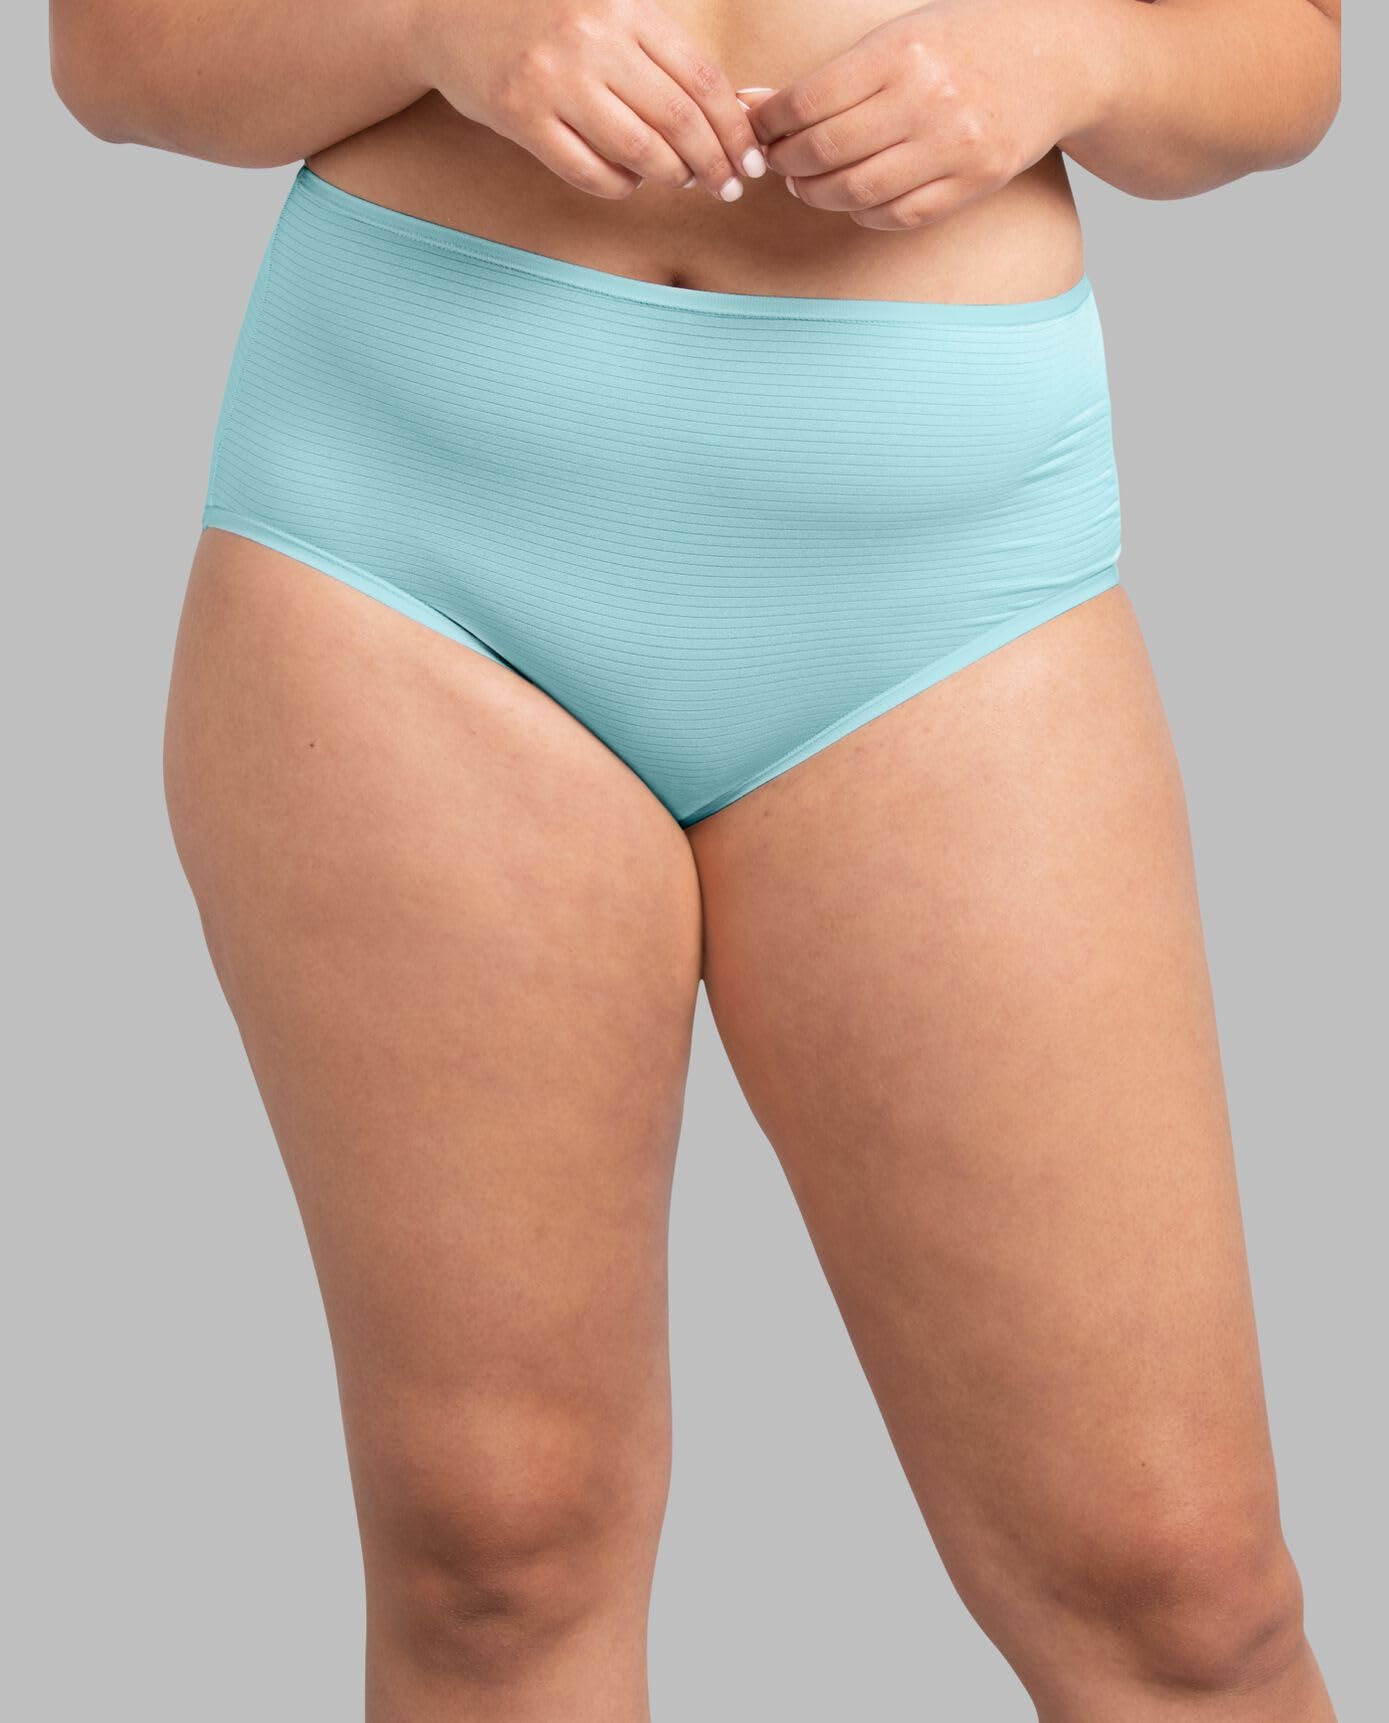 Fruit of the Loom Women's Breathable Underwear, Moisture Wicking Keeps You Cool & Comfortable, Available in Plus Size